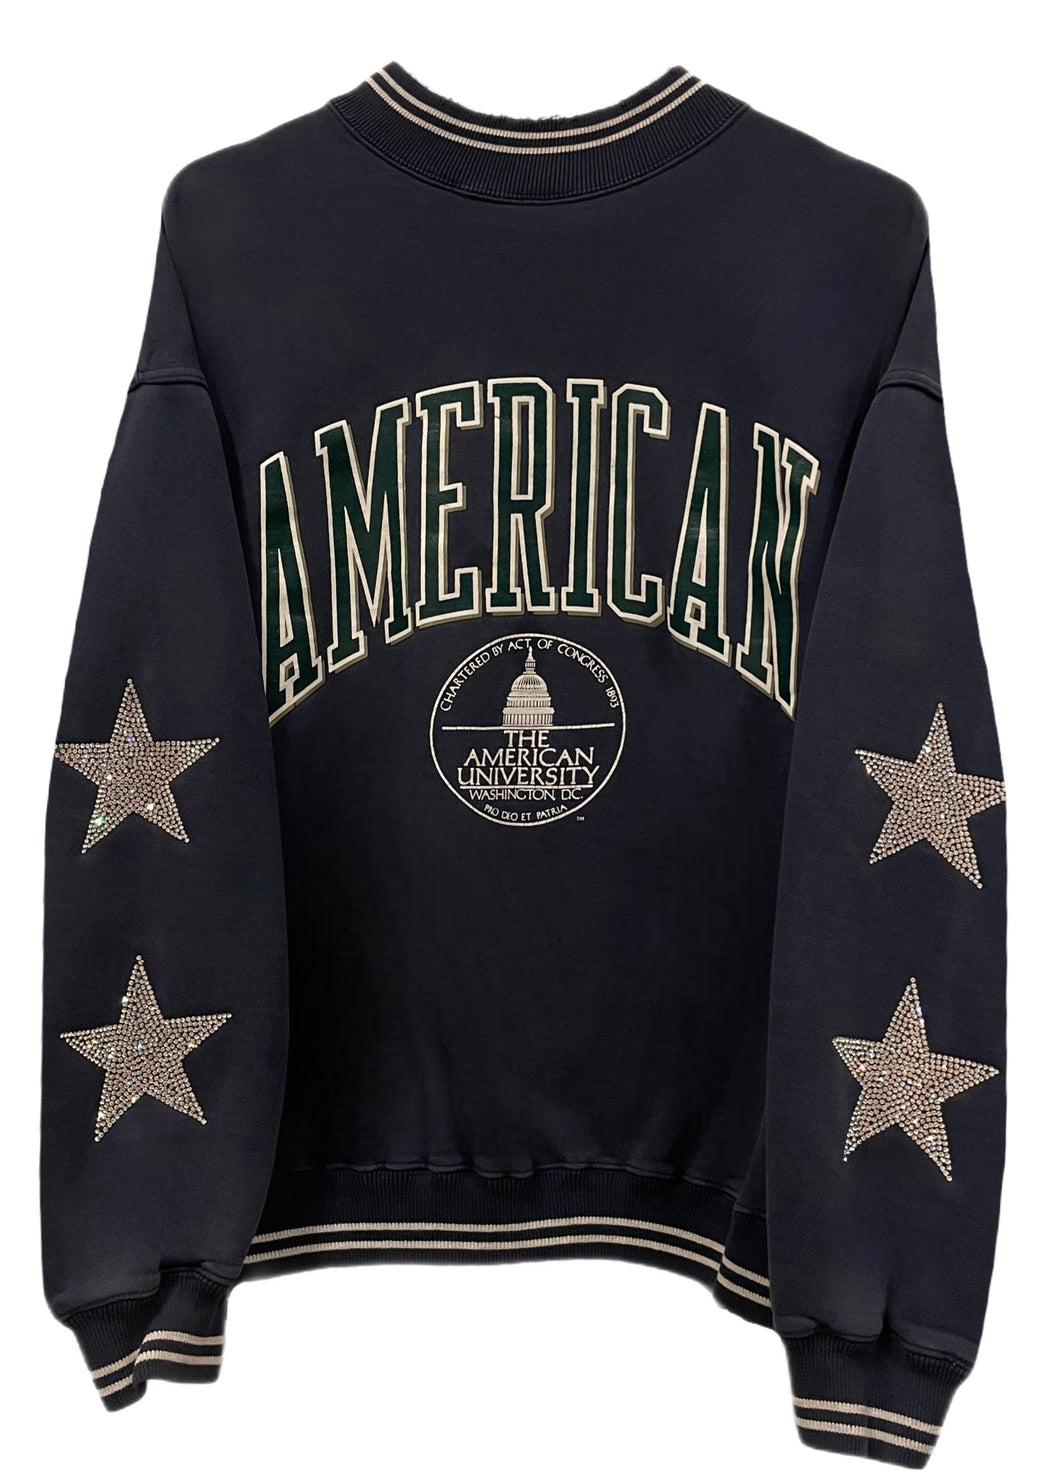 American University, One of a KIND Vintage Sweatshirt with Crystal Star Design